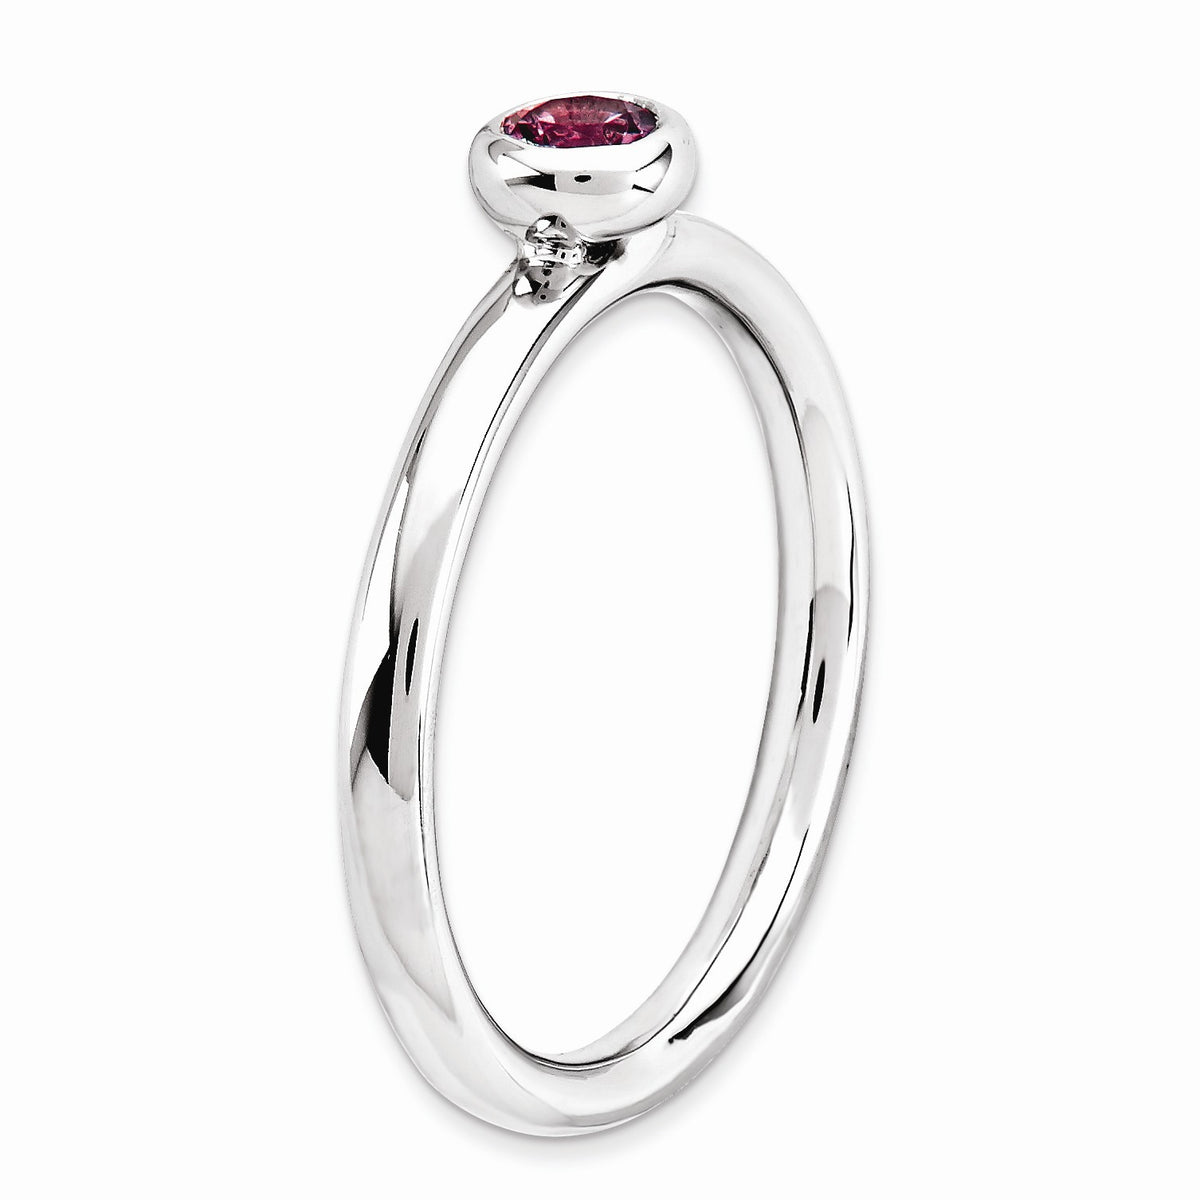 Alternate view of the Stackable Low Profile 4mm Pink Tourmaline Silver Ring by The Black Bow Jewelry Co.